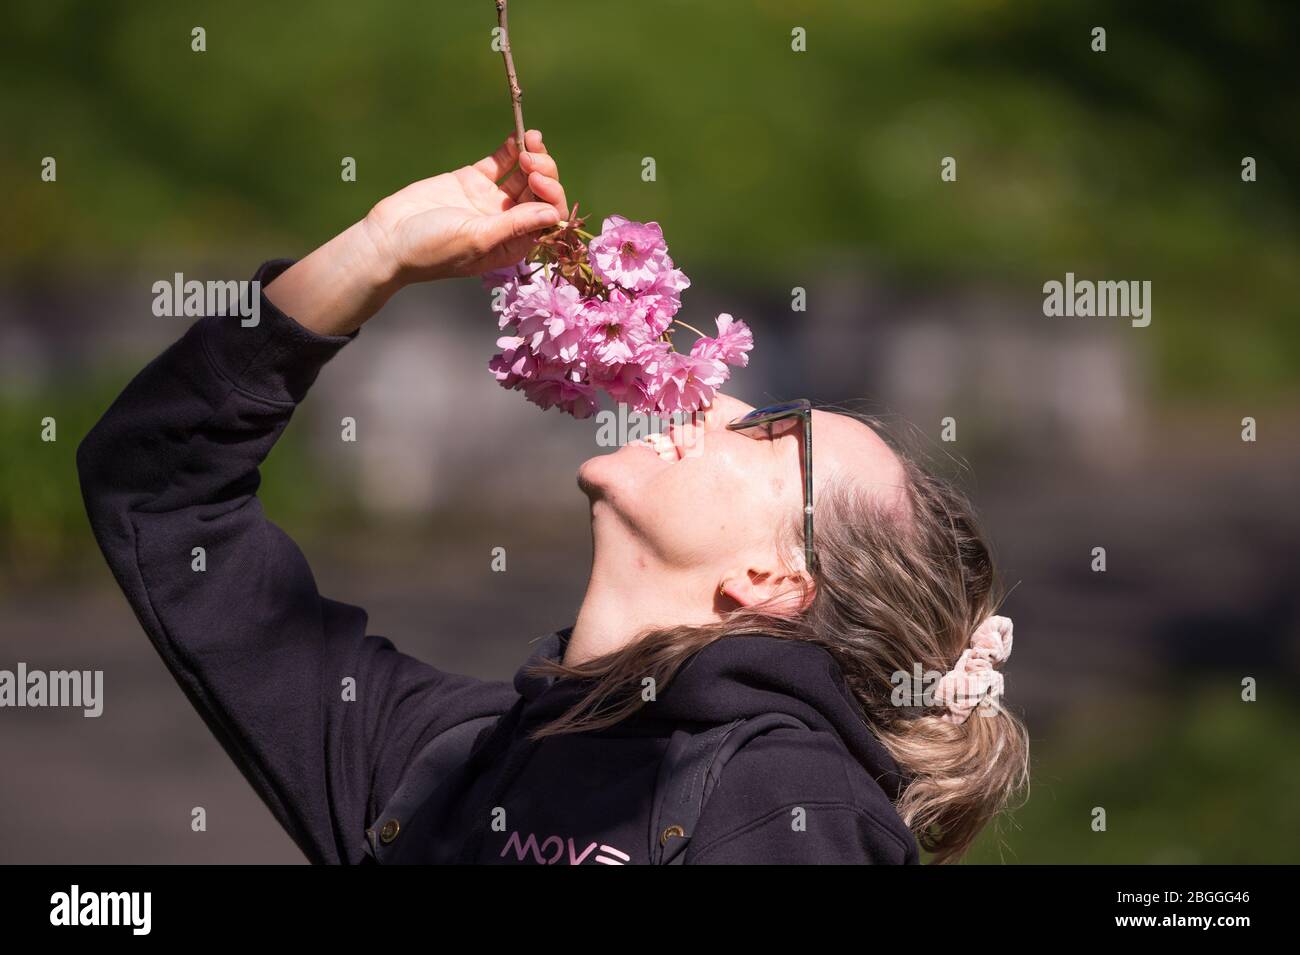 Glasgow, UK. 21st Apr, 2020. Pictured: A park goer stops and pulls down a branch of pink cherry blossom to sniff the scent. Scenes from Kelvingrove Park in Glasgow during the coronavirus (COVID-19) lockdown. Credit: Colin Fisher/Alamy Live News Stock Photo